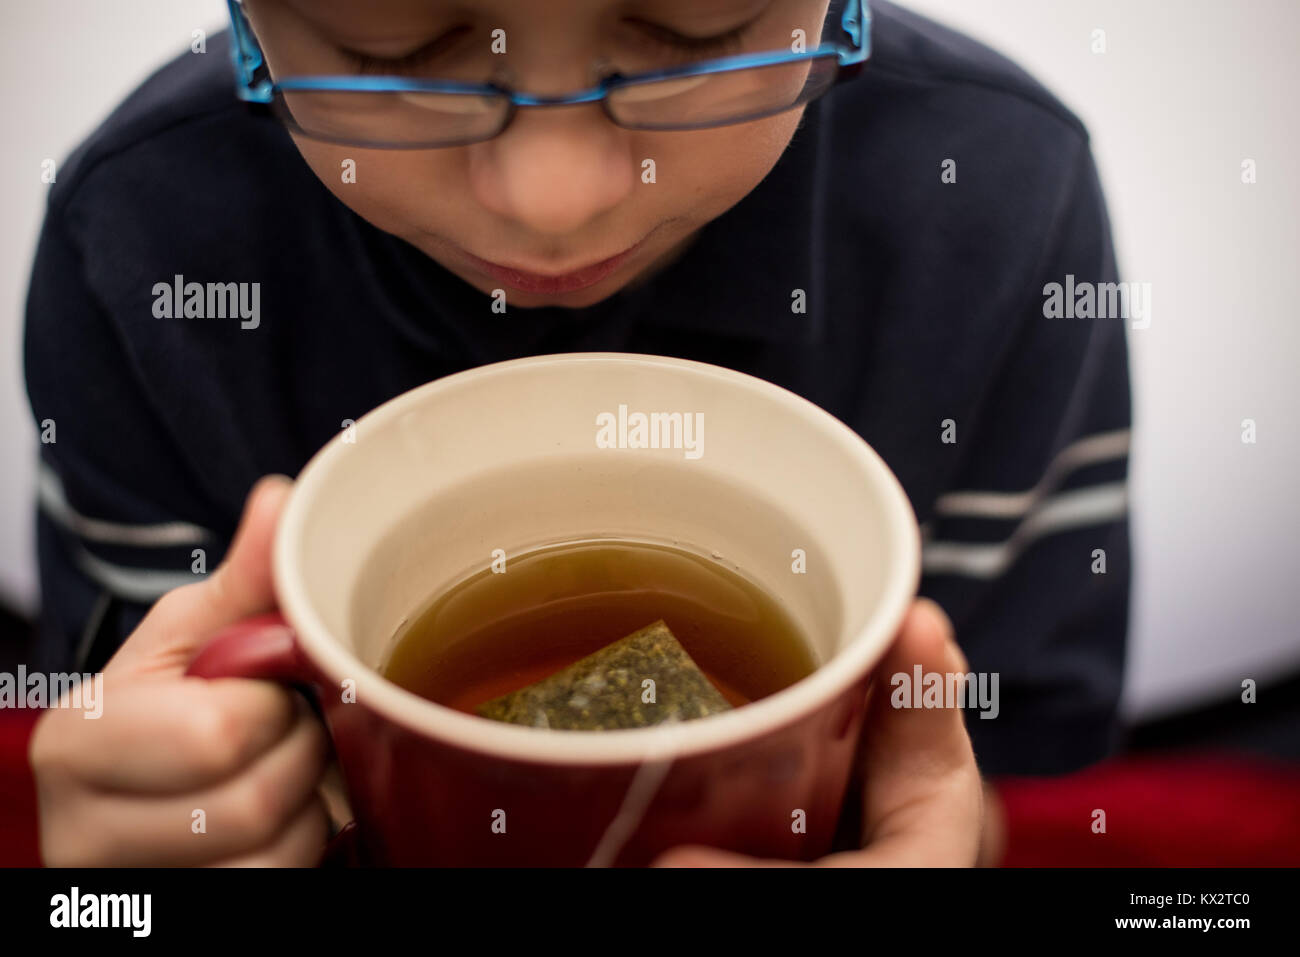 A young boy drinks from a cup of tea in a red cup. Stock Photo